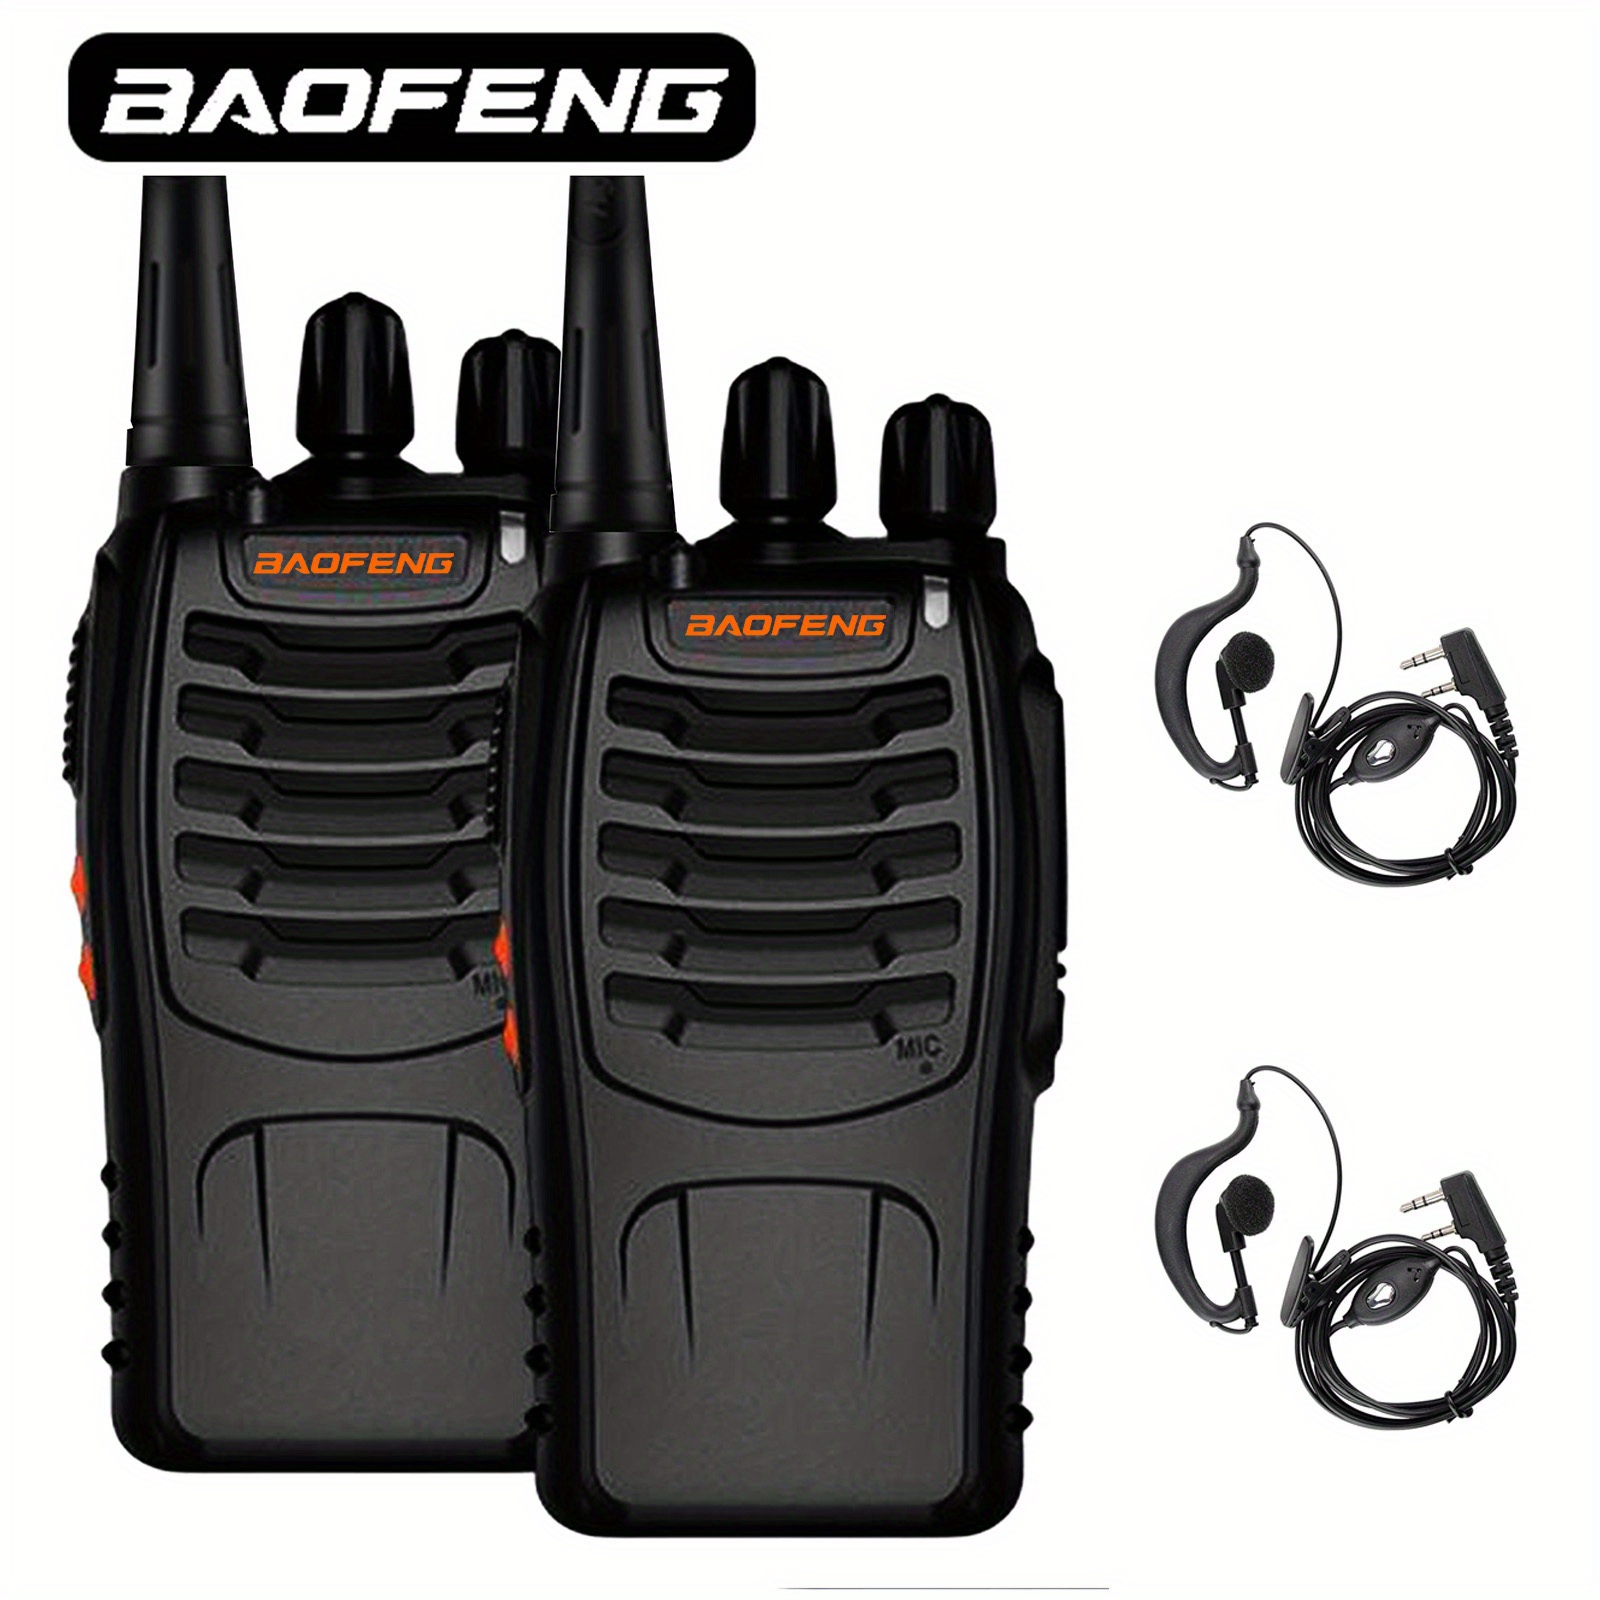 2pcs Bf 888h Walkie Talkie Two Way Radio With Built In Led Flashlight Usb  Charging Cable Free Shipping, Free Returns Temu Belgium